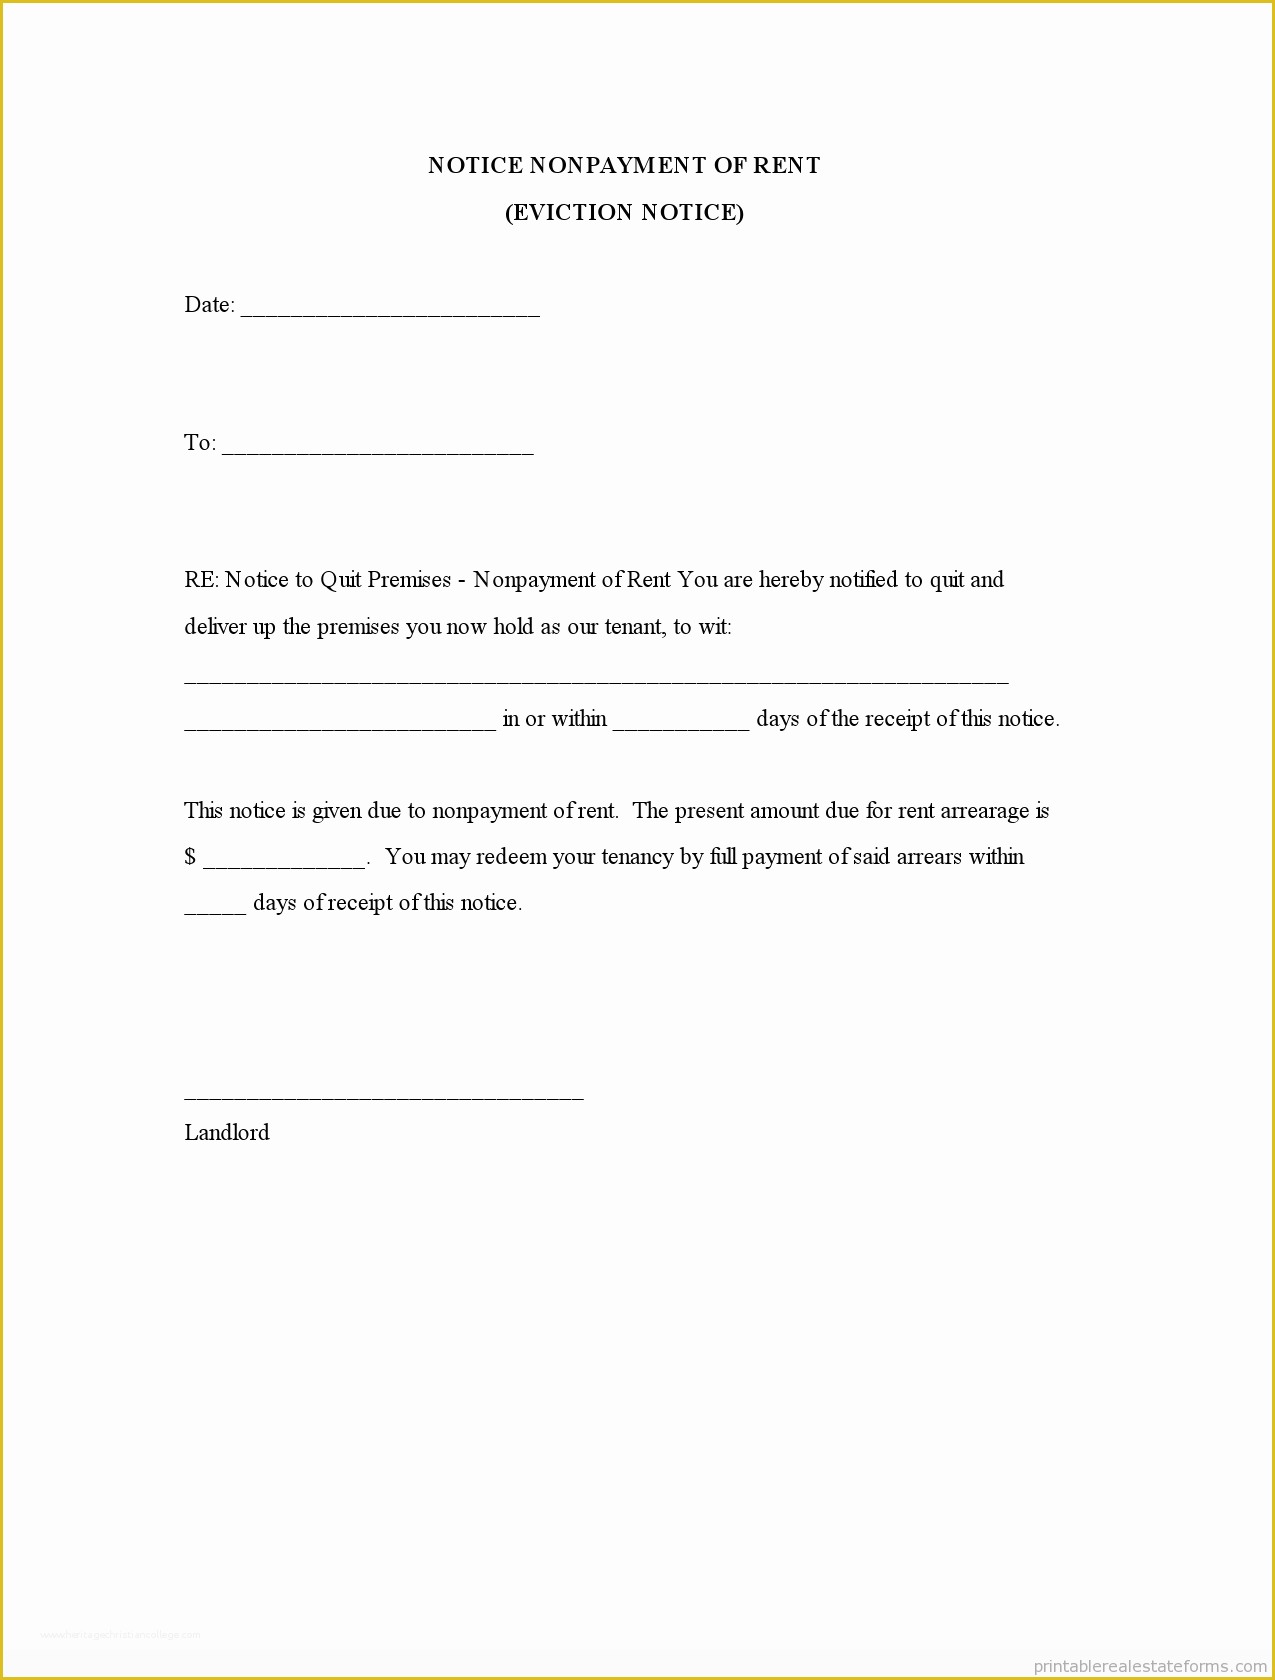 Free Printable Eviction Notice Template Of Free Printable Eviction Notice form Sample Template